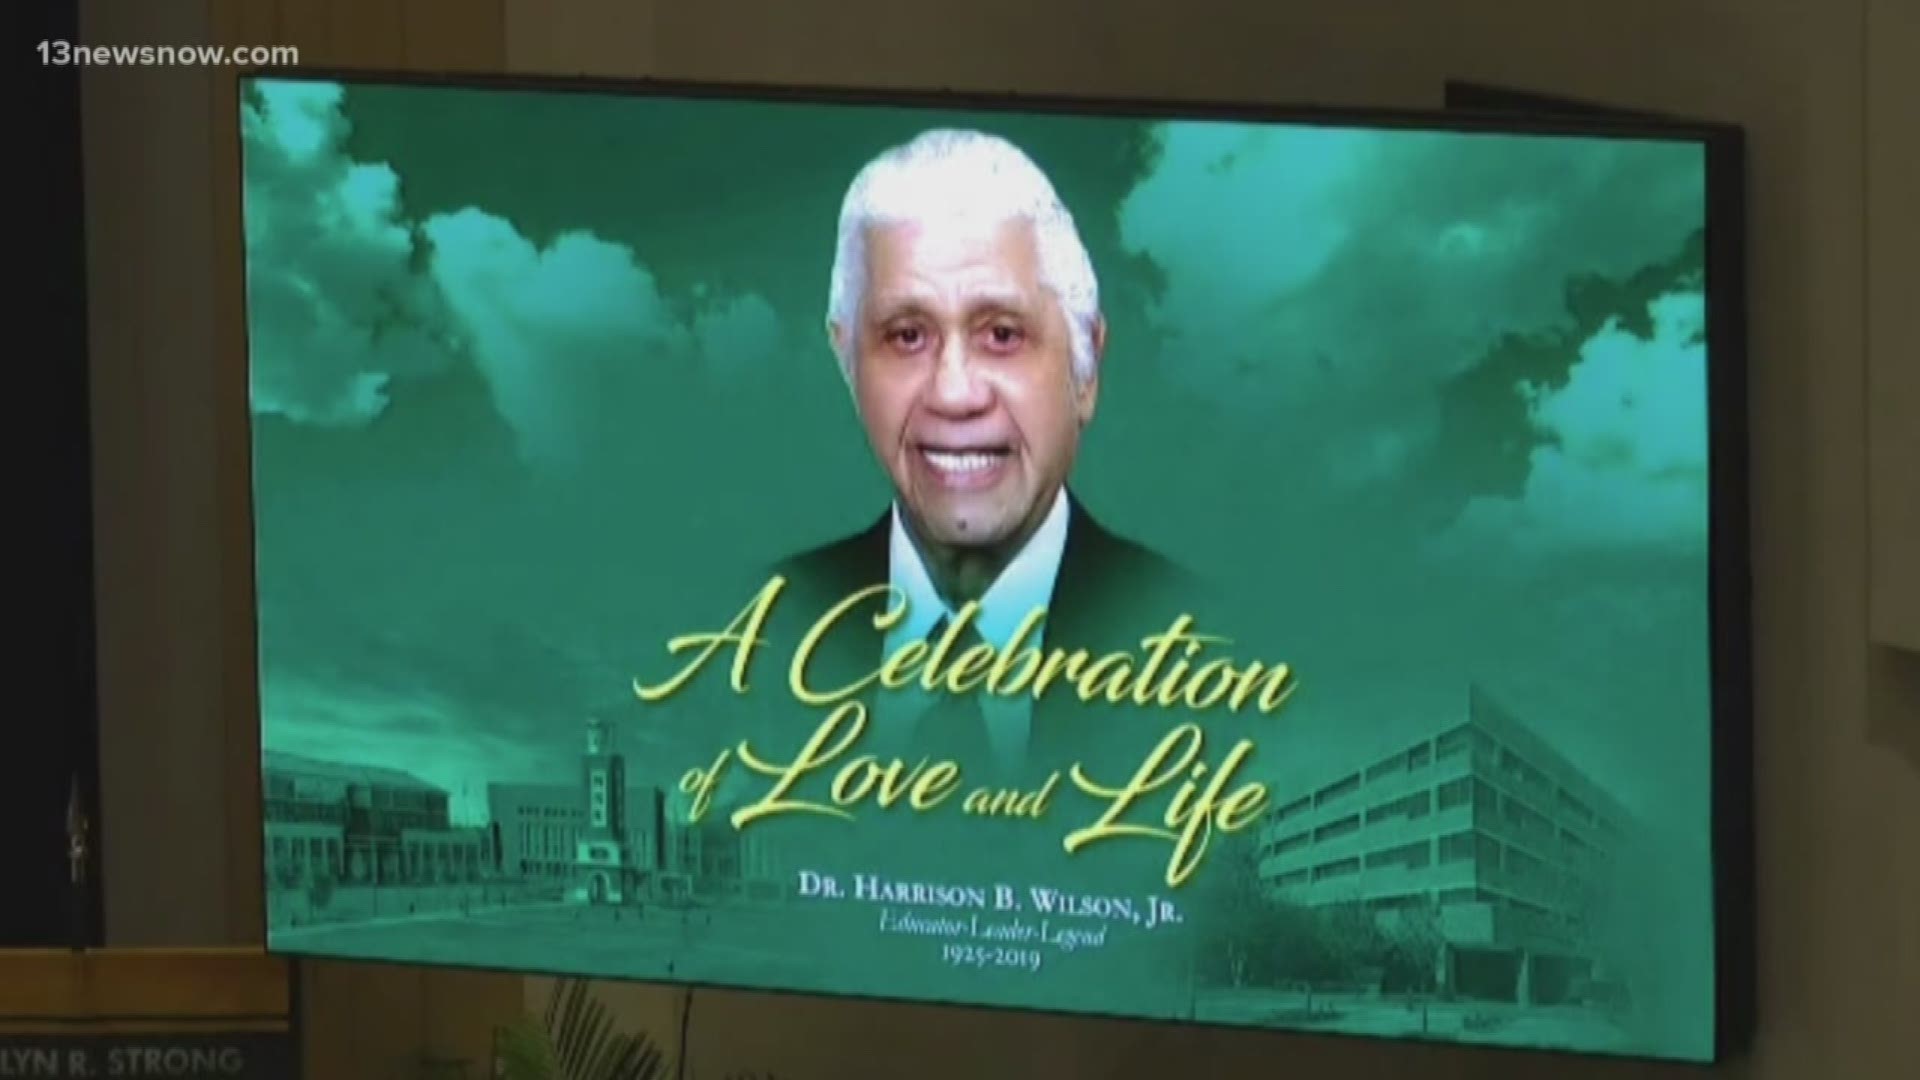 Family and friends came together to honor the former NSU President Dr. Harrison B. Wilson Jr.